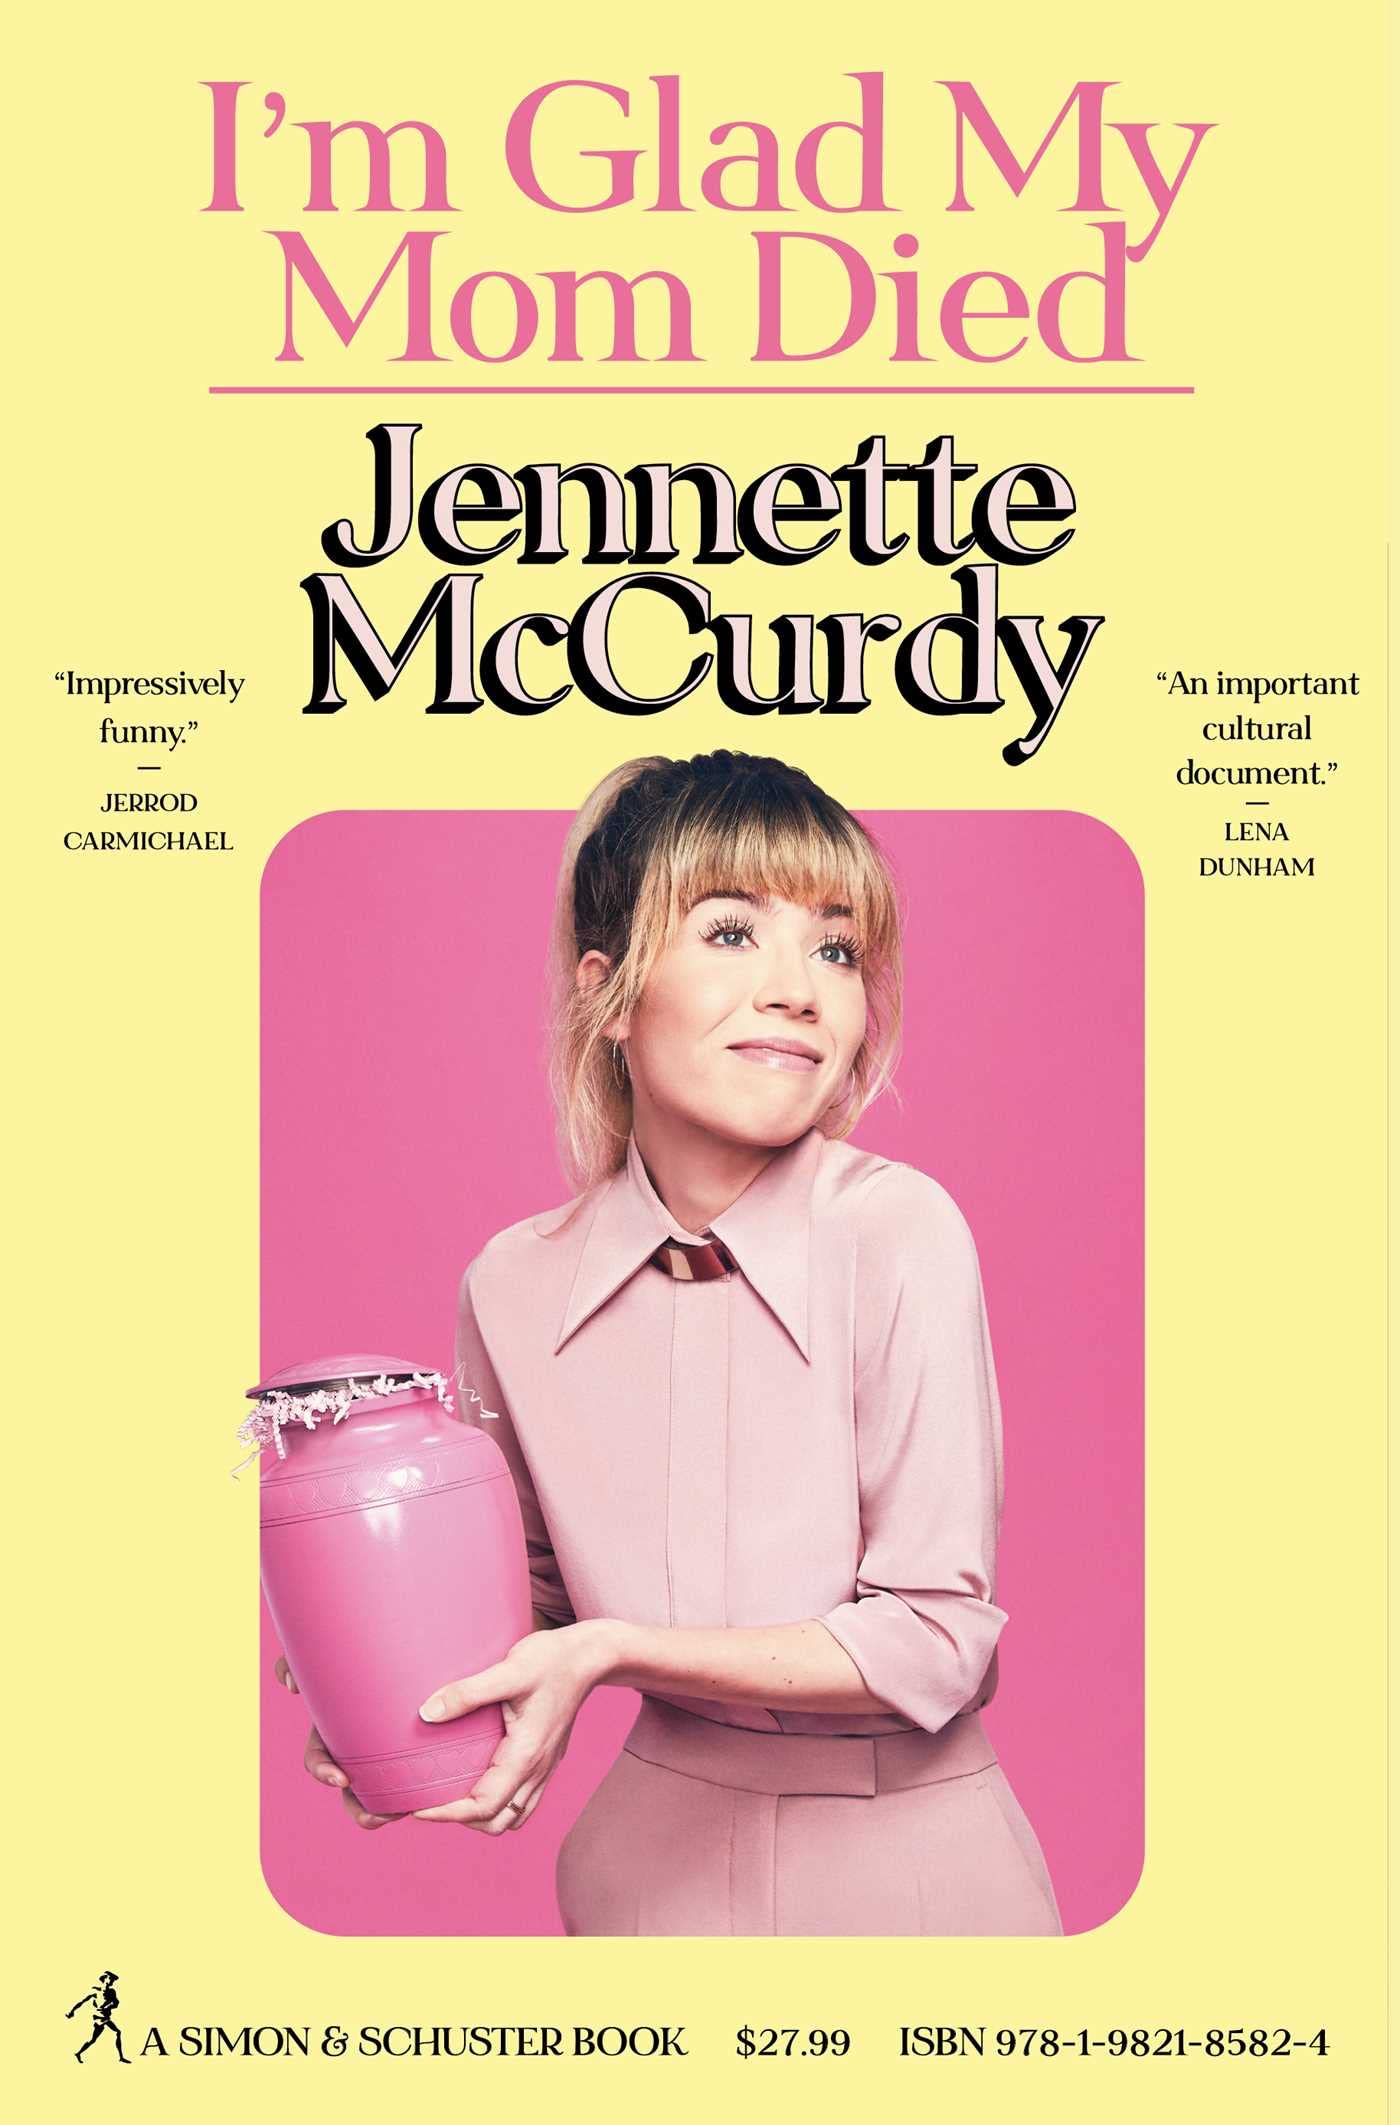 I’m Glad My Mom Died by Jennette McCurdy 2